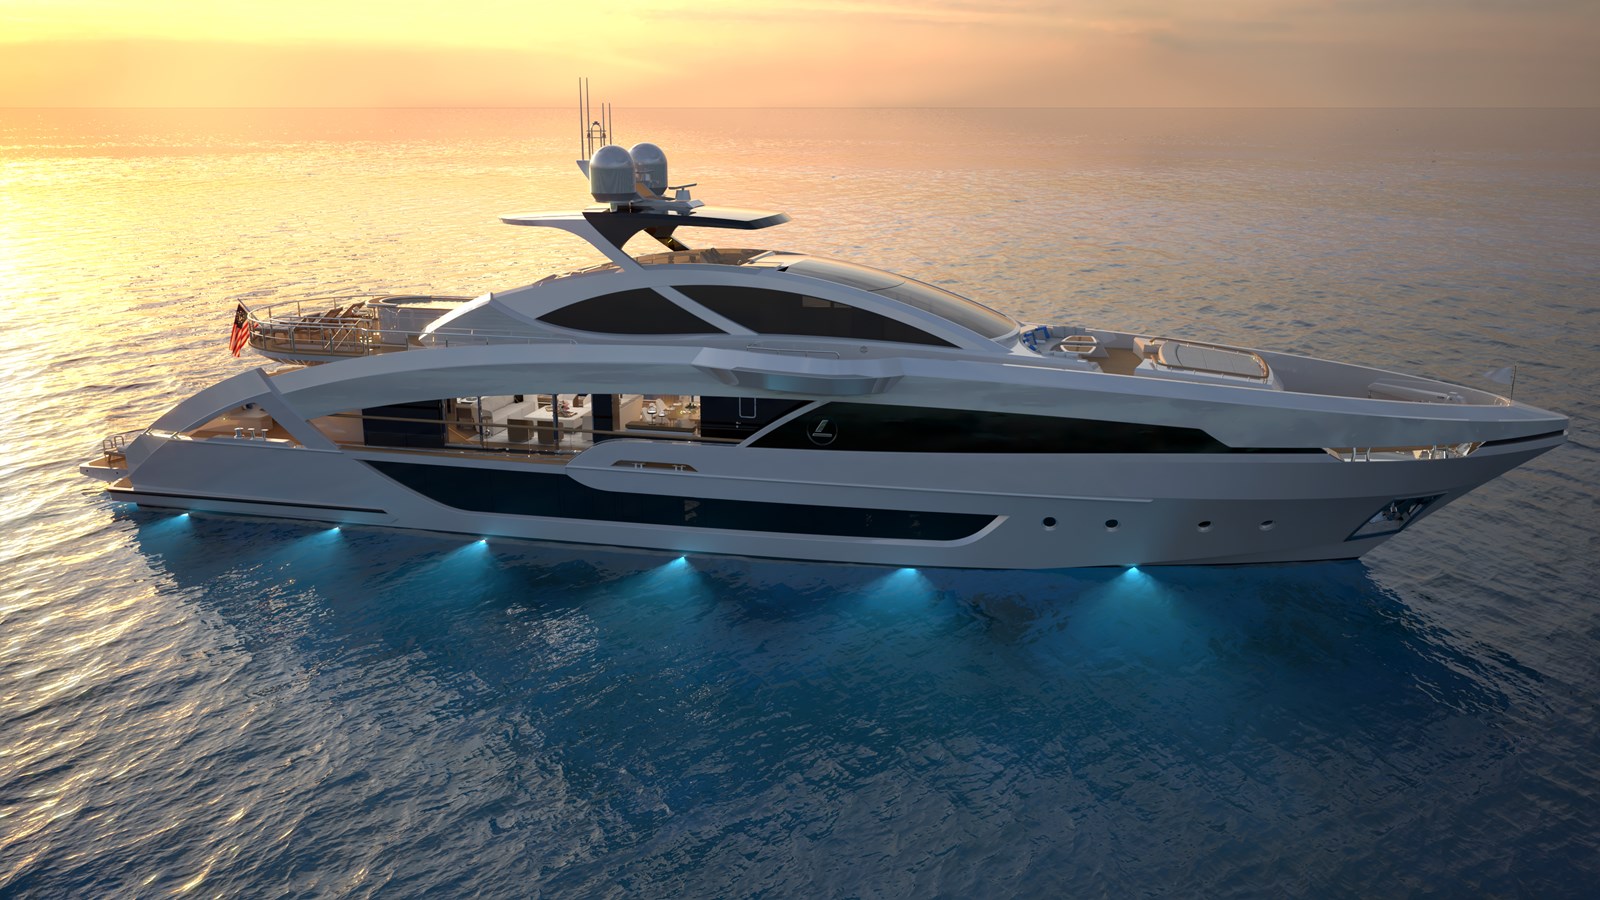 YACHTZOO appointed as a global agent for GHI Yachts